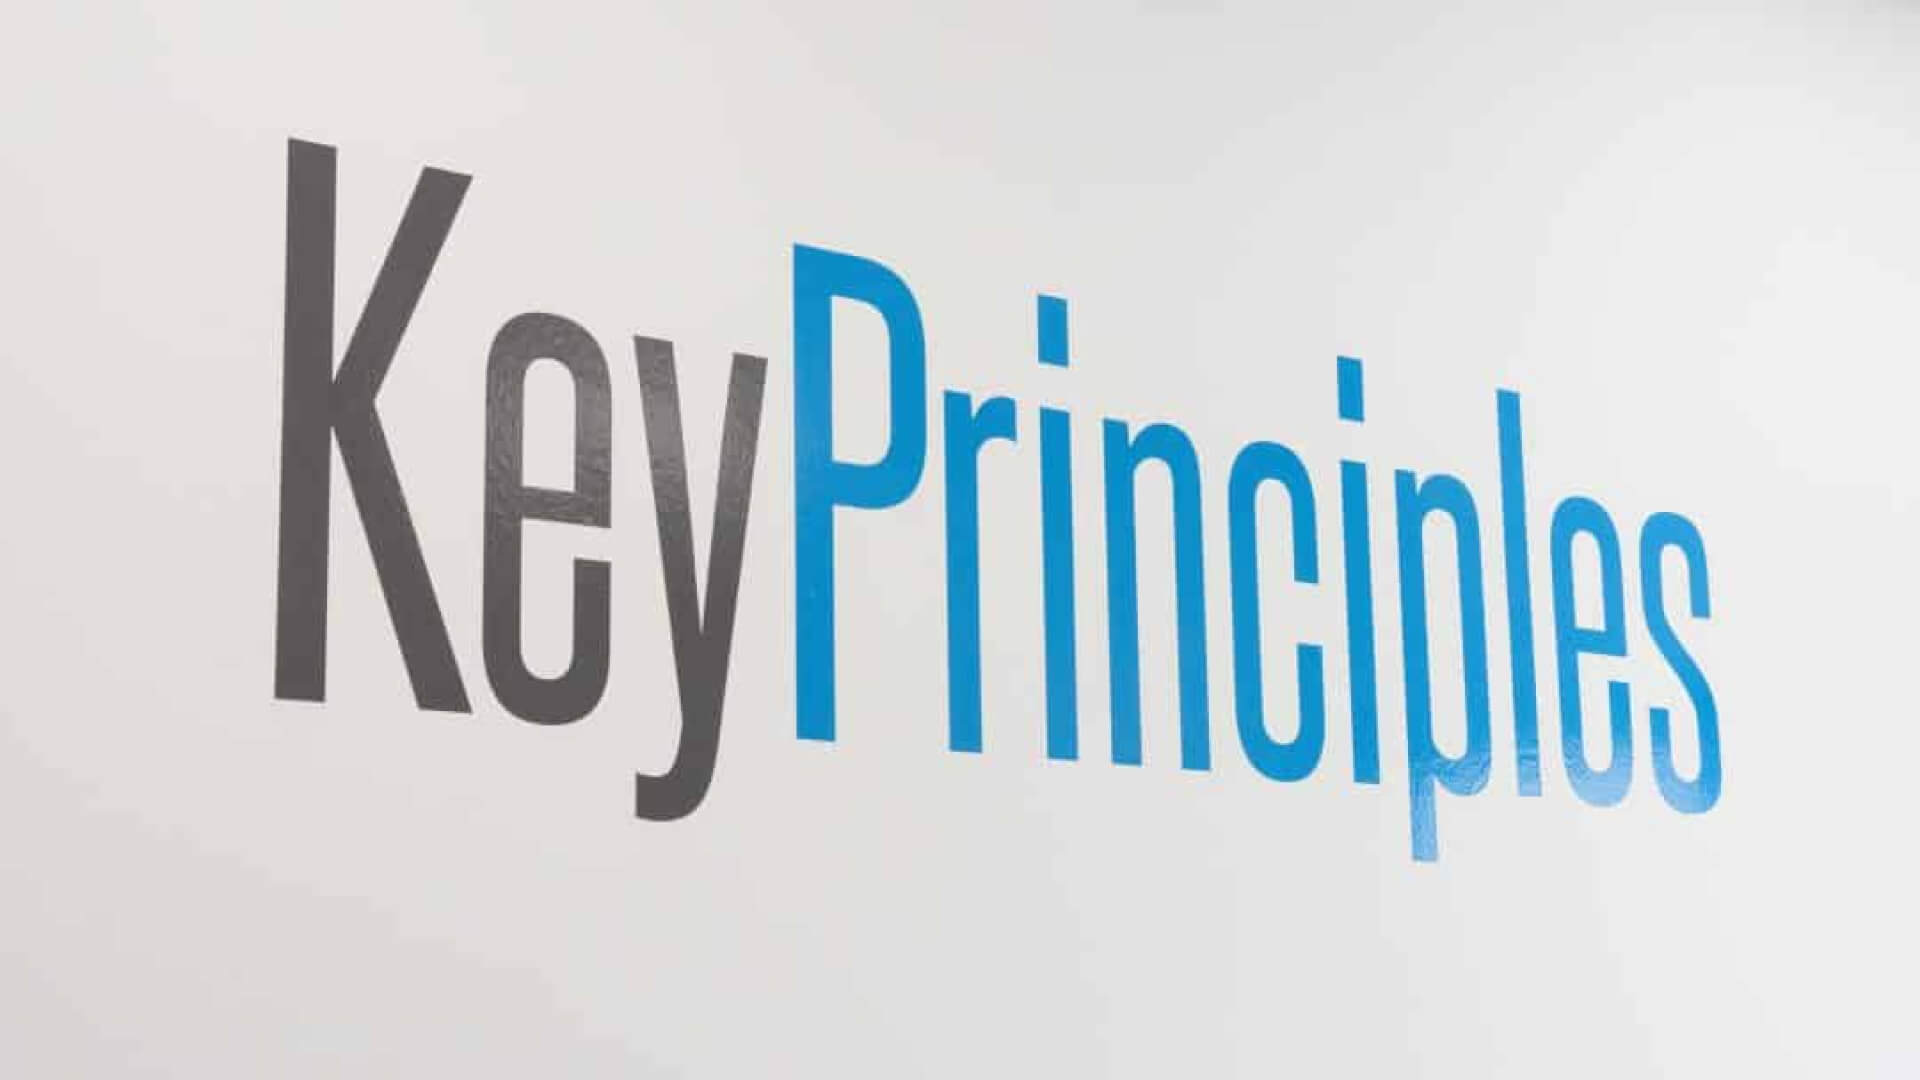 The phrase 'Key Principles' in bold, blue and grey lettering on a white background.